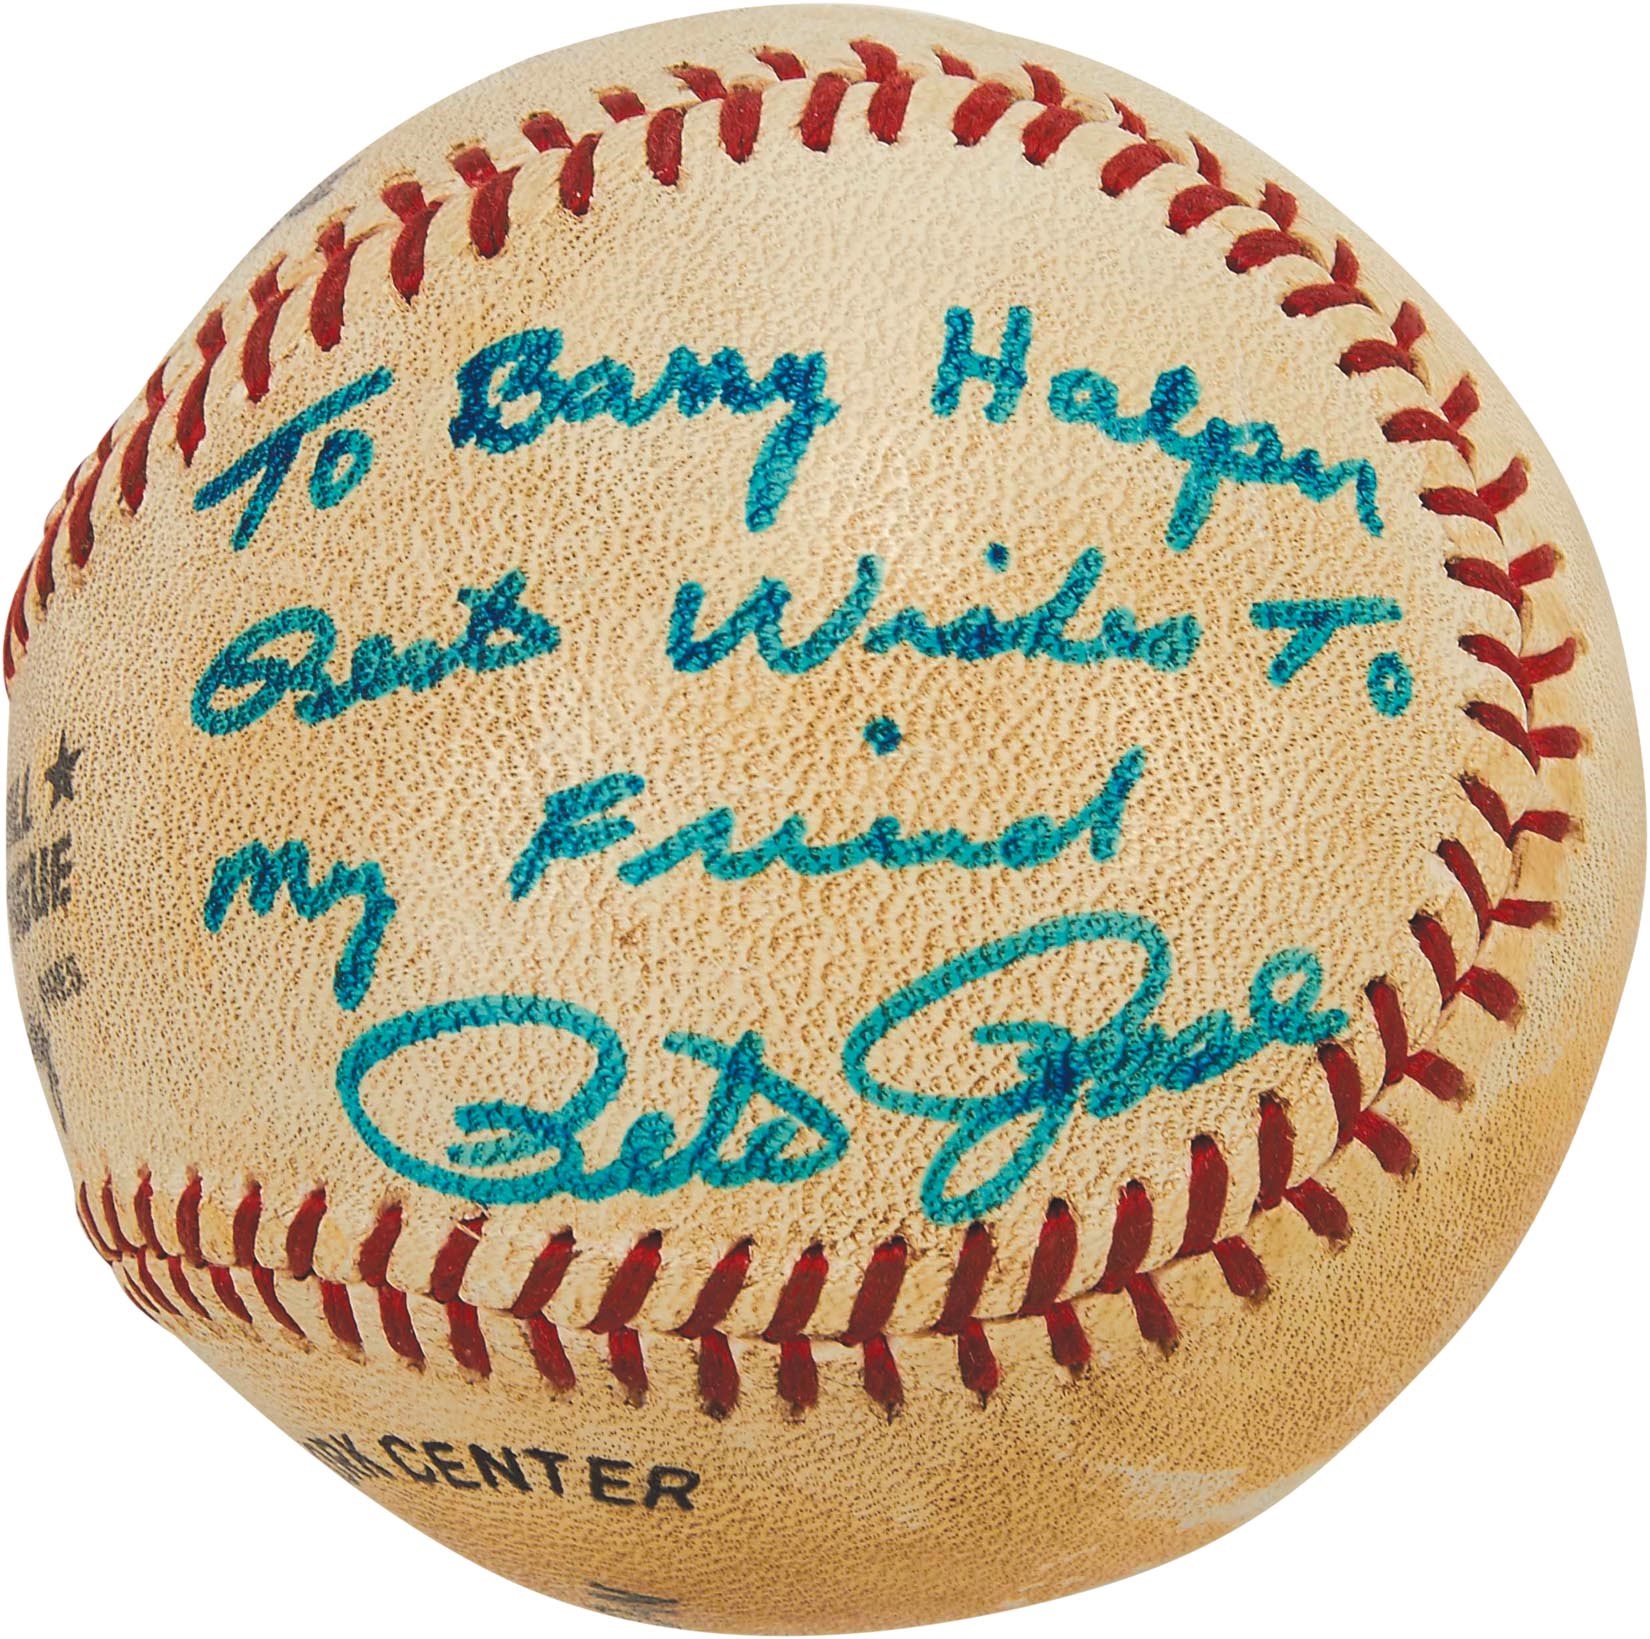 - Pete Rose 3,630th Hit Ball Tying Stan Musial for Most NL Hits - Gifted to Barry Halper (PSA)